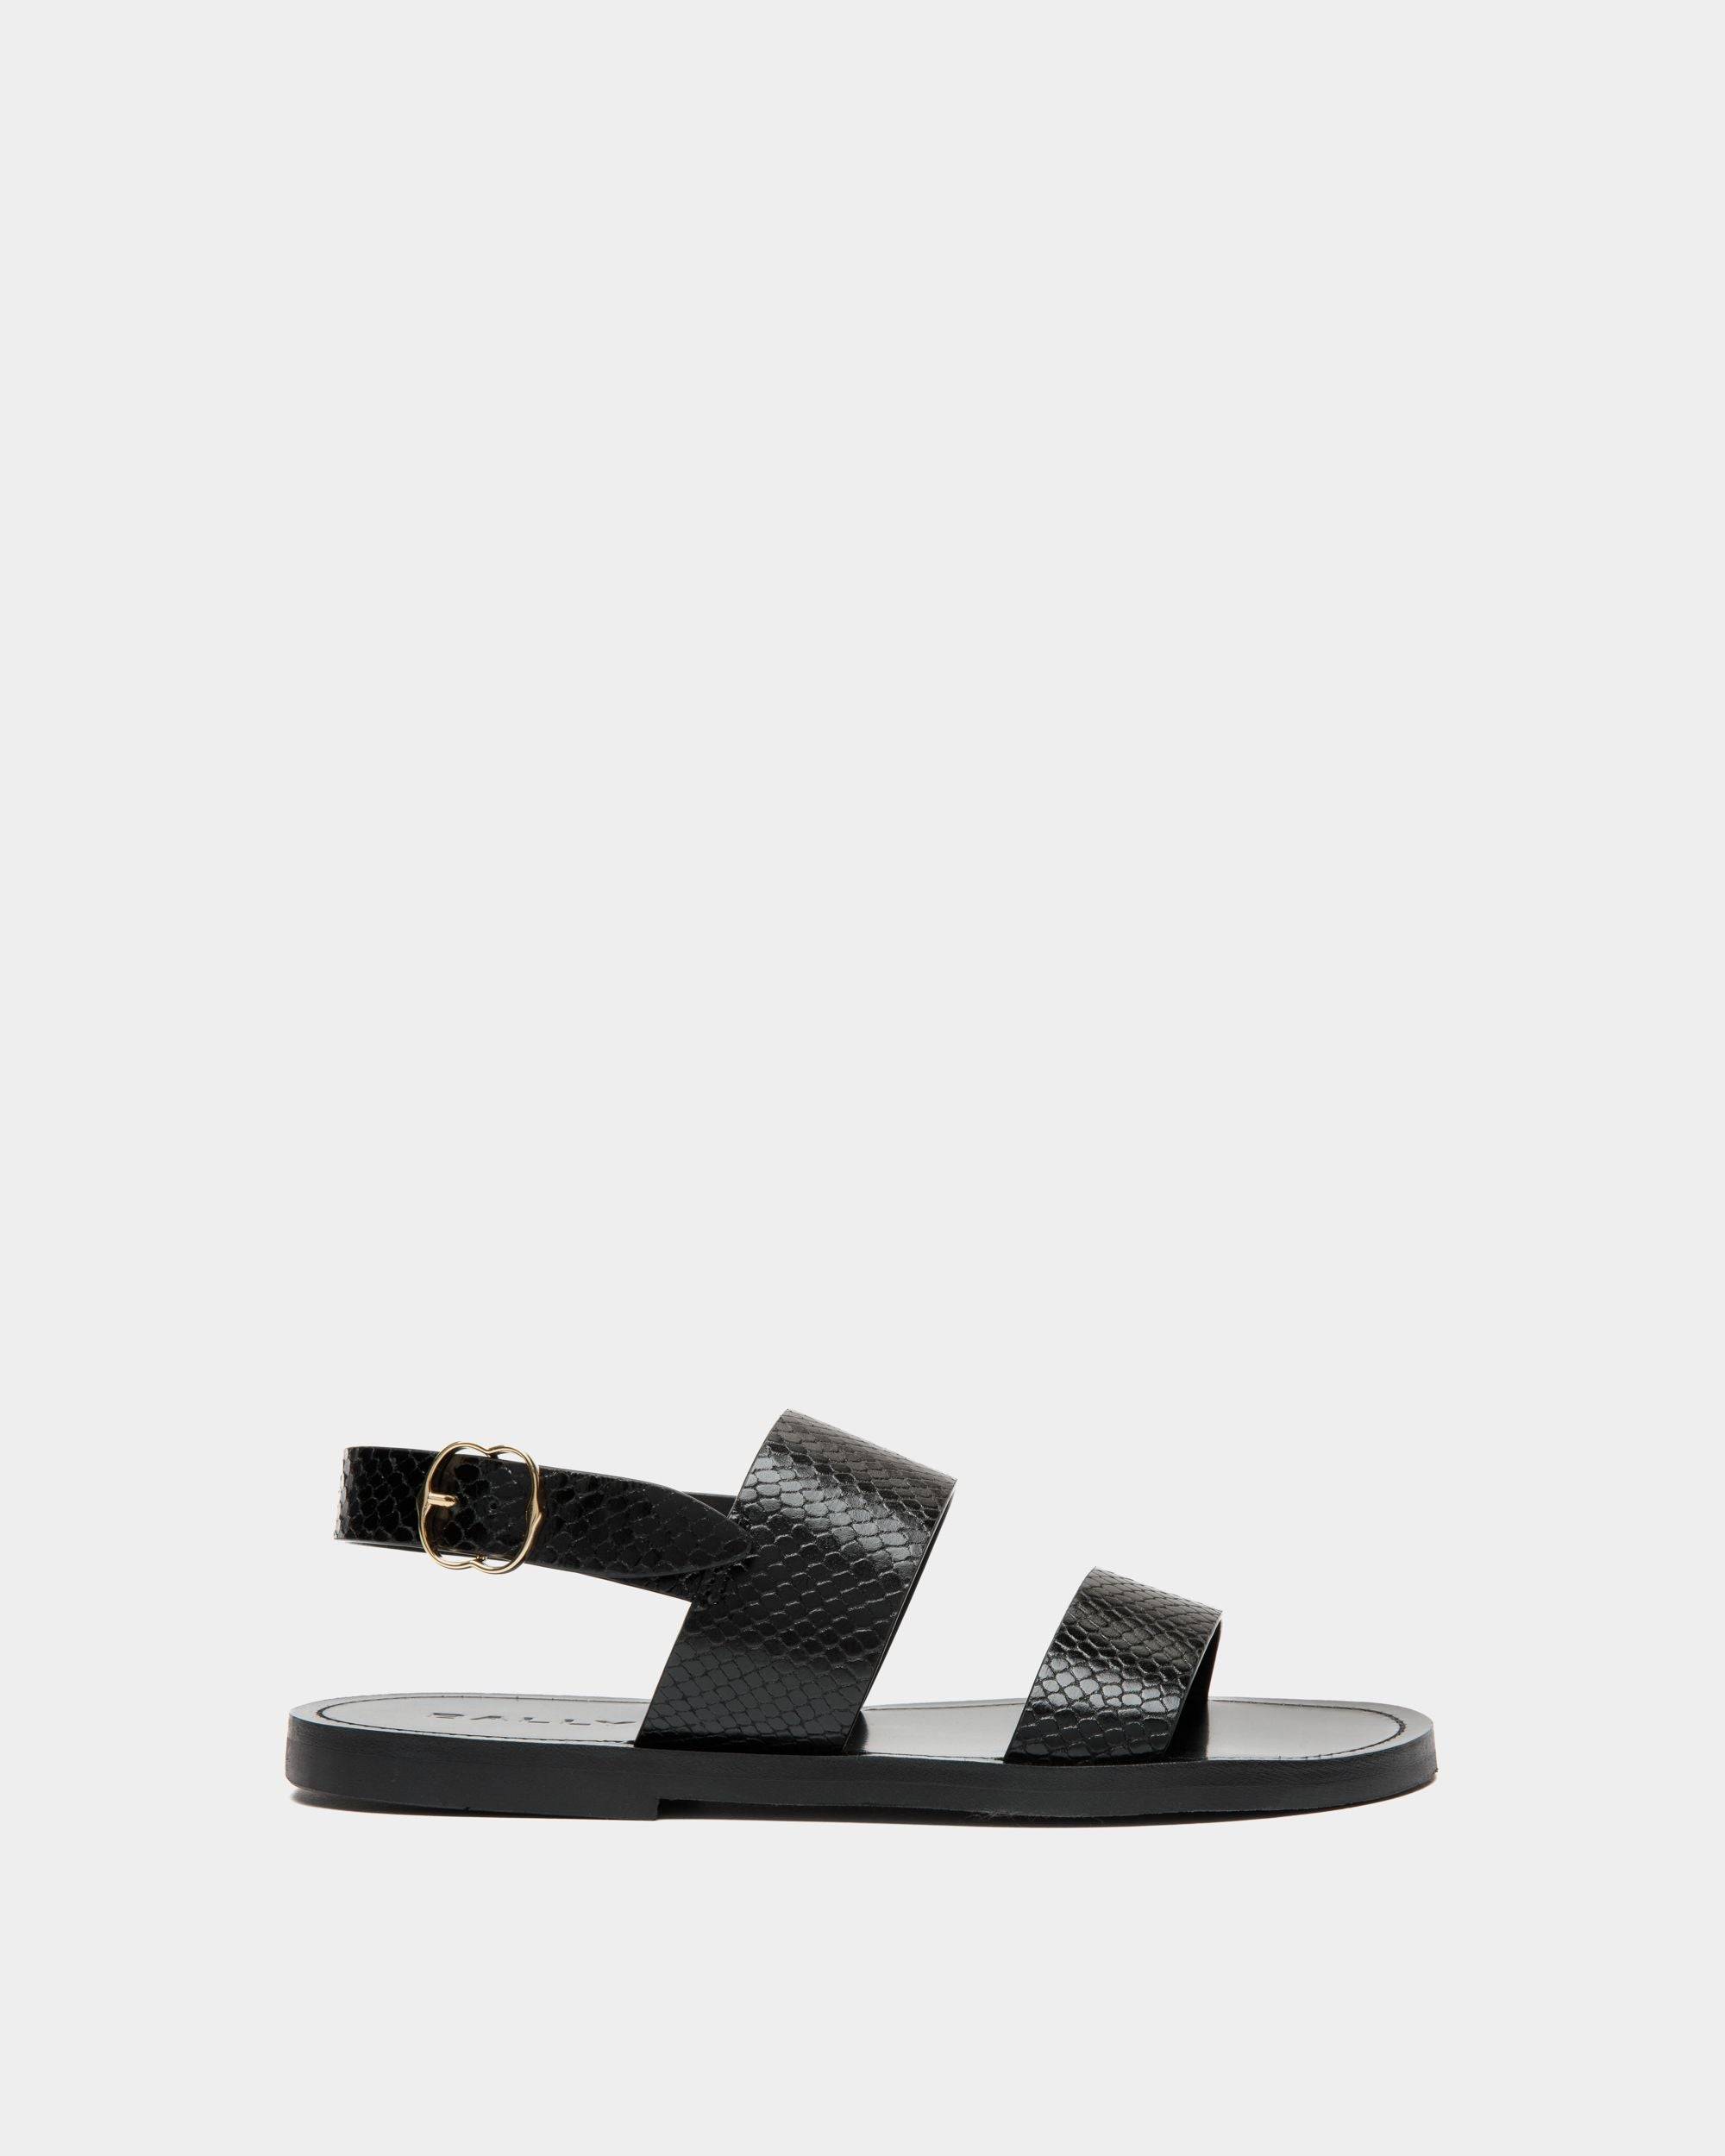 Baudy | Women's Flat Sandal in Black Python Printed Leather | Bally | Still Life Side